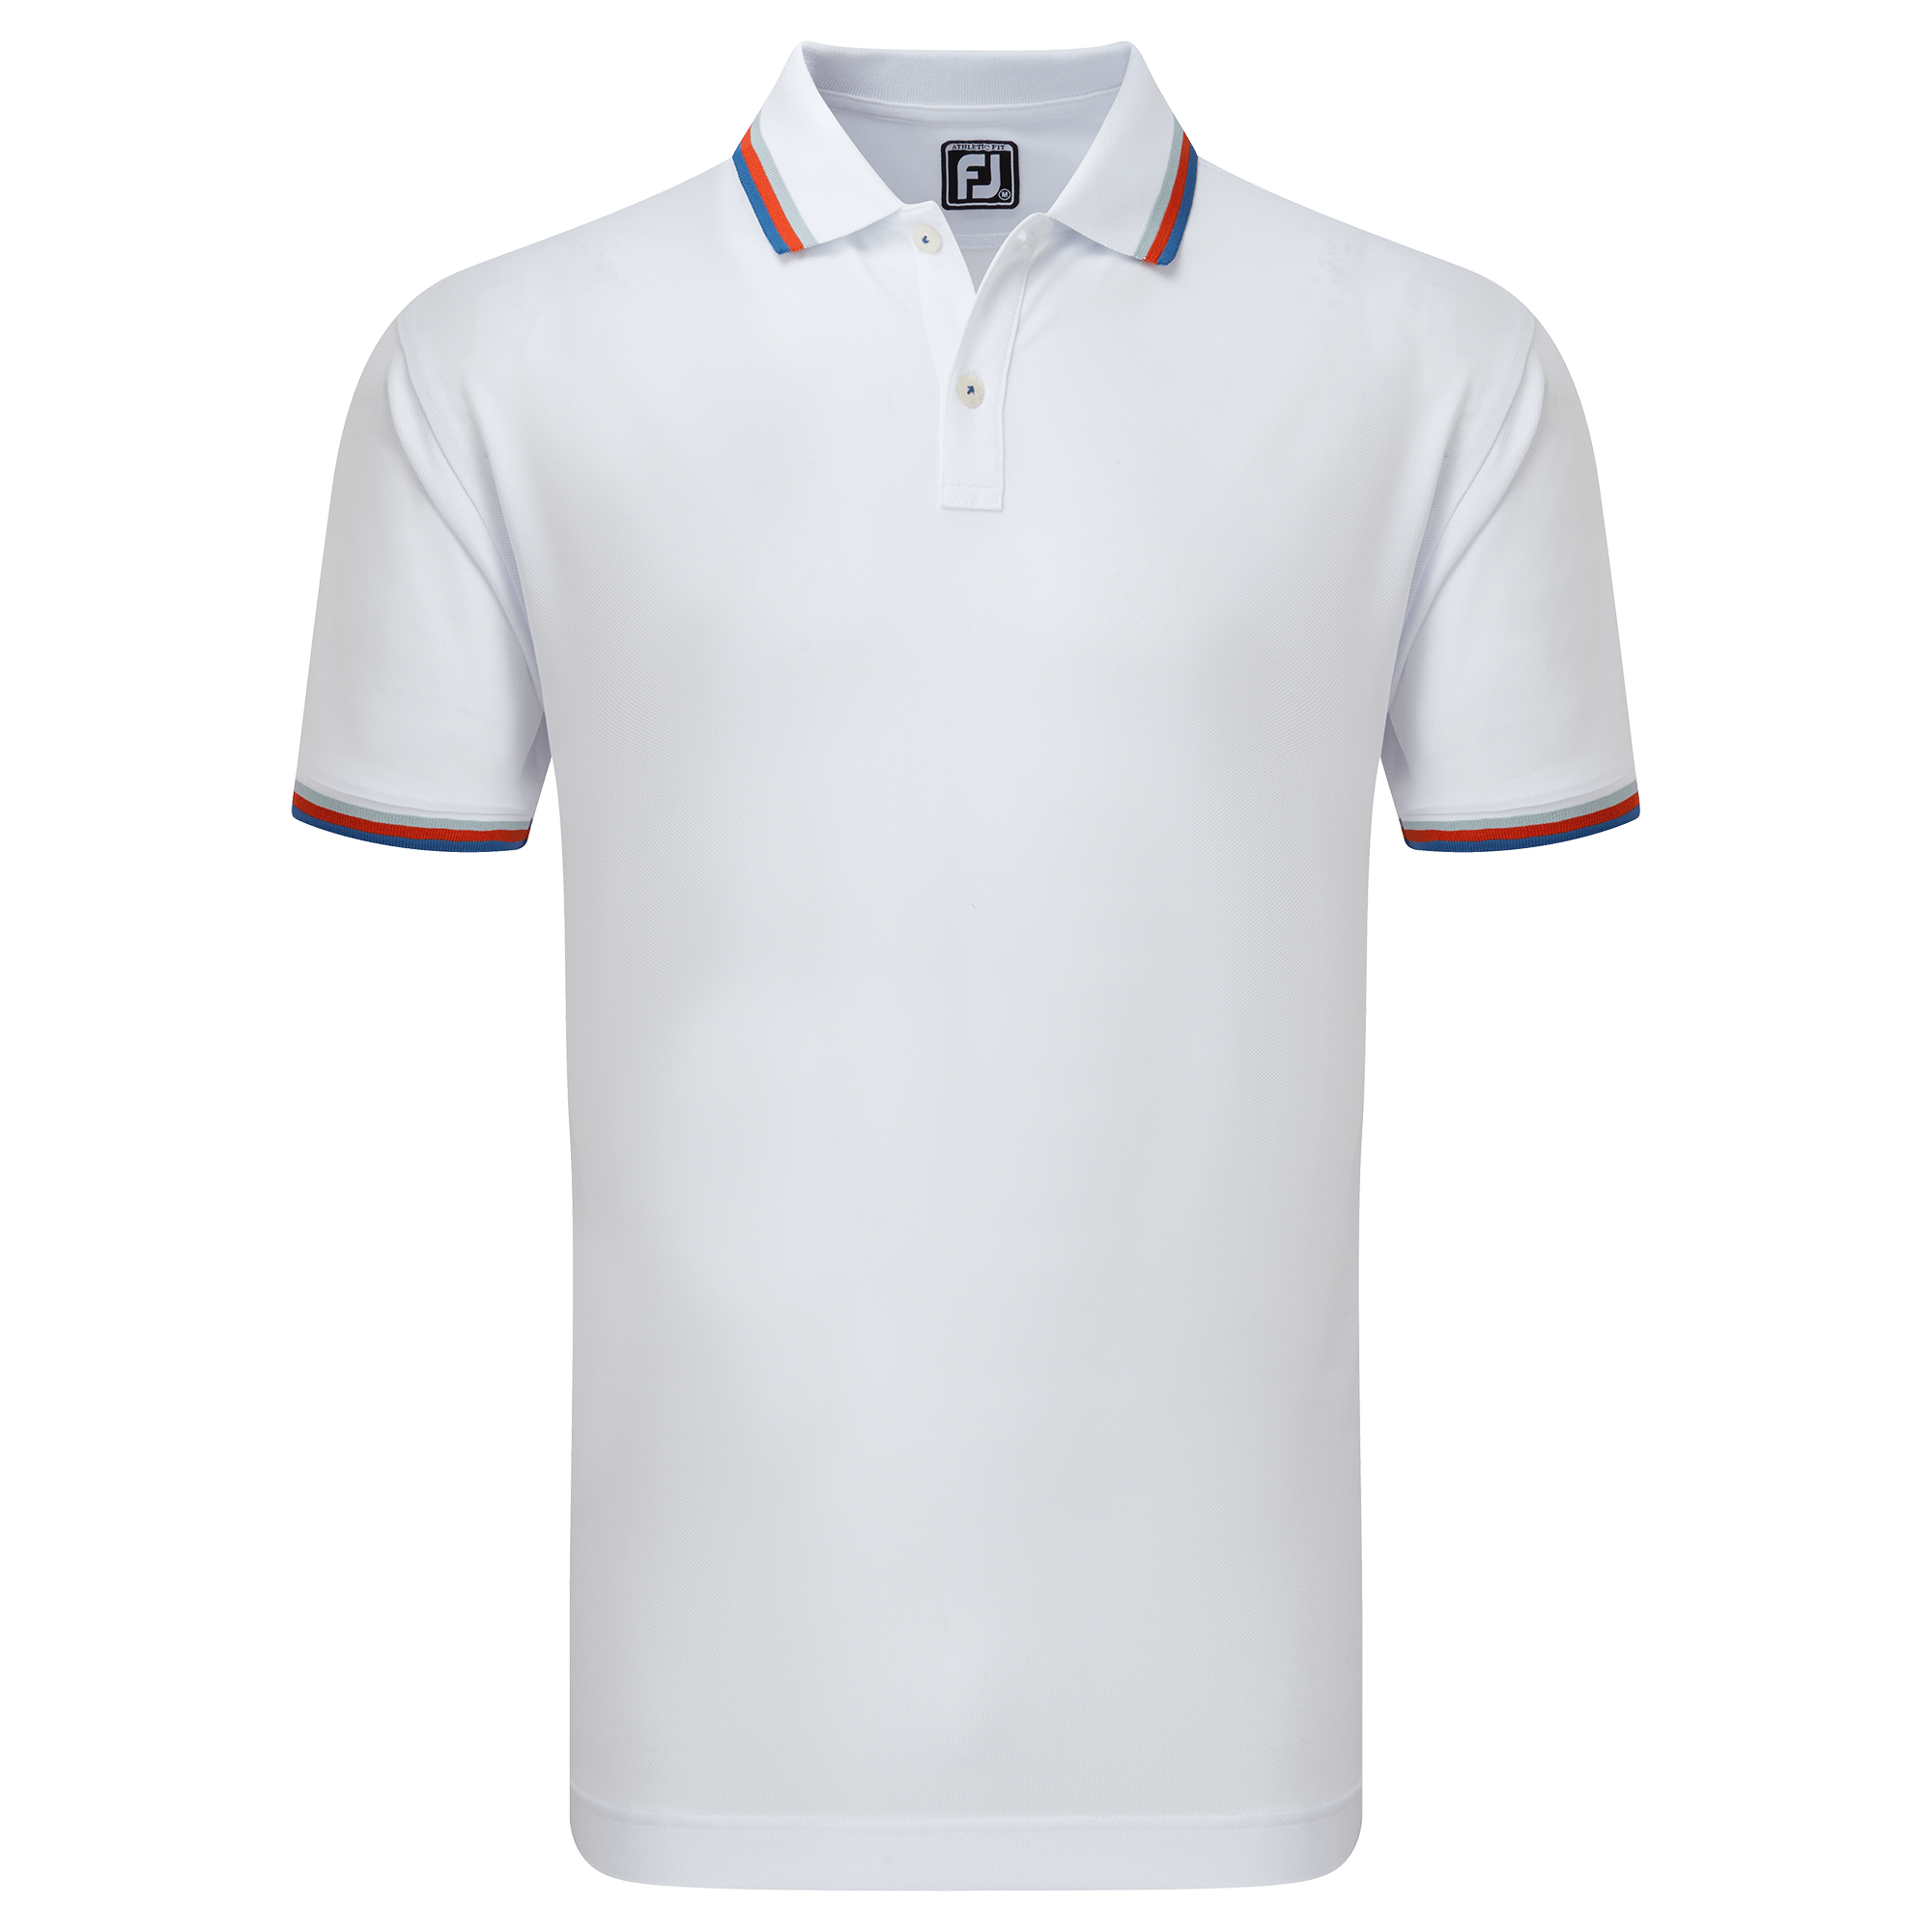 FootJoy Solid Golf Polo Shirt with Trim